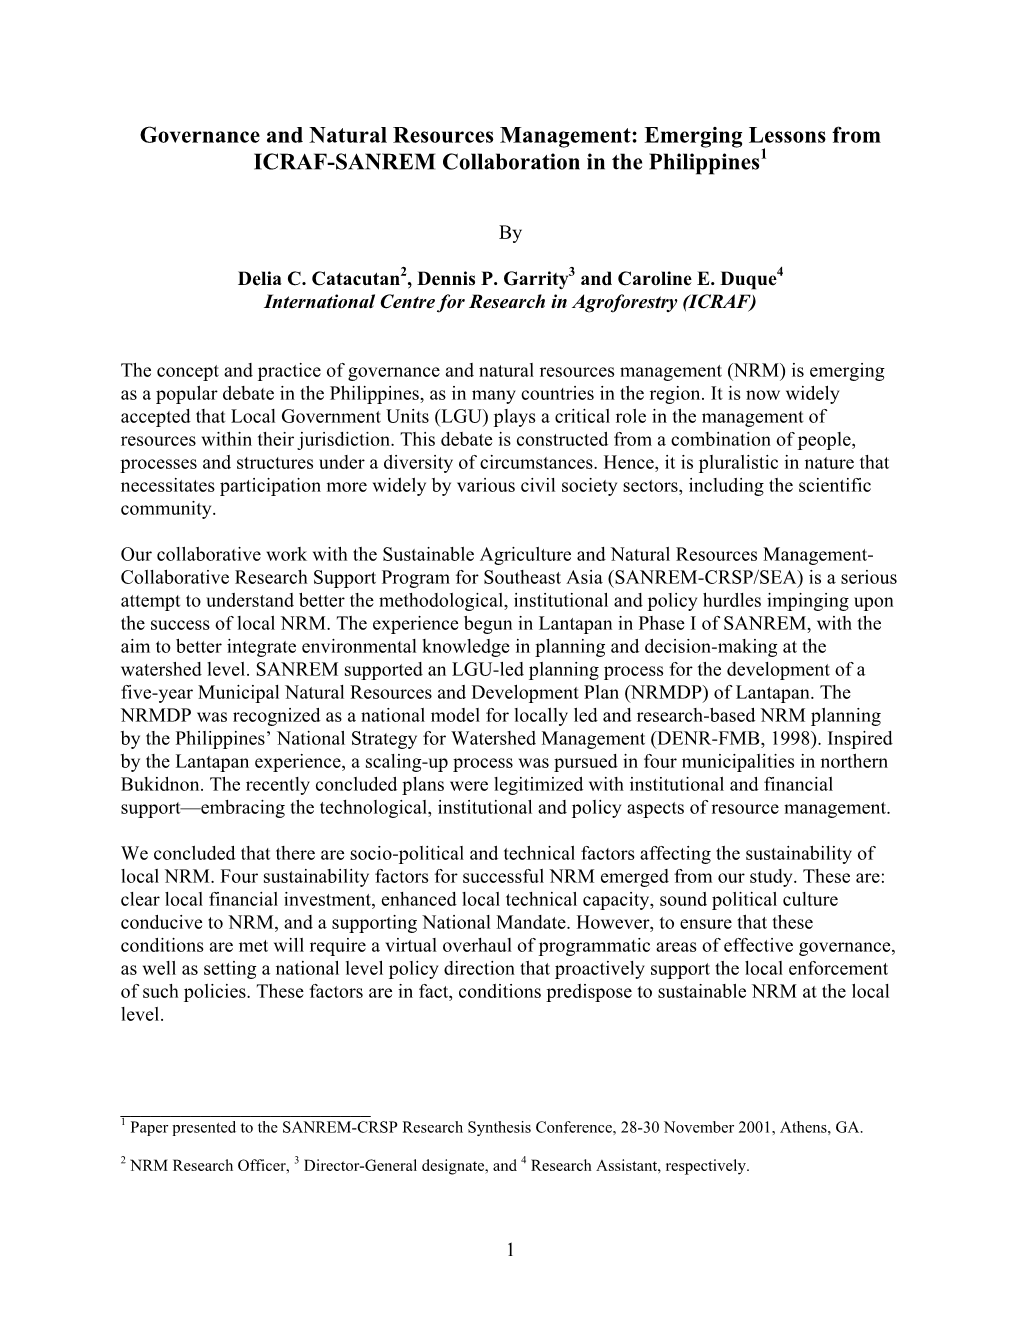 Governance and Natural Resources Management: Emerging Lessons from ICRAF-SANREM Collaboration in the Philippines1